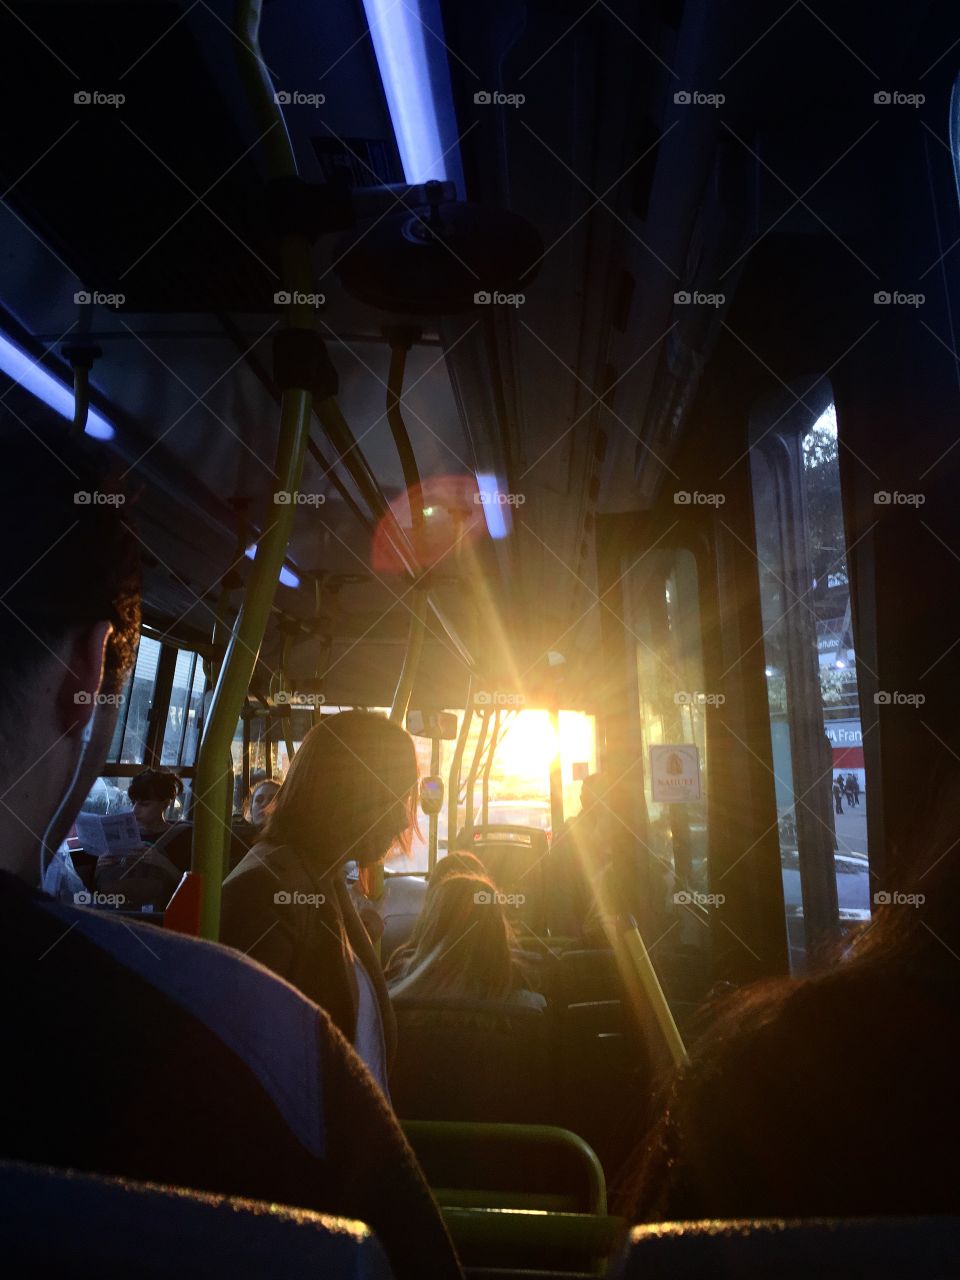 Sunset in the bus